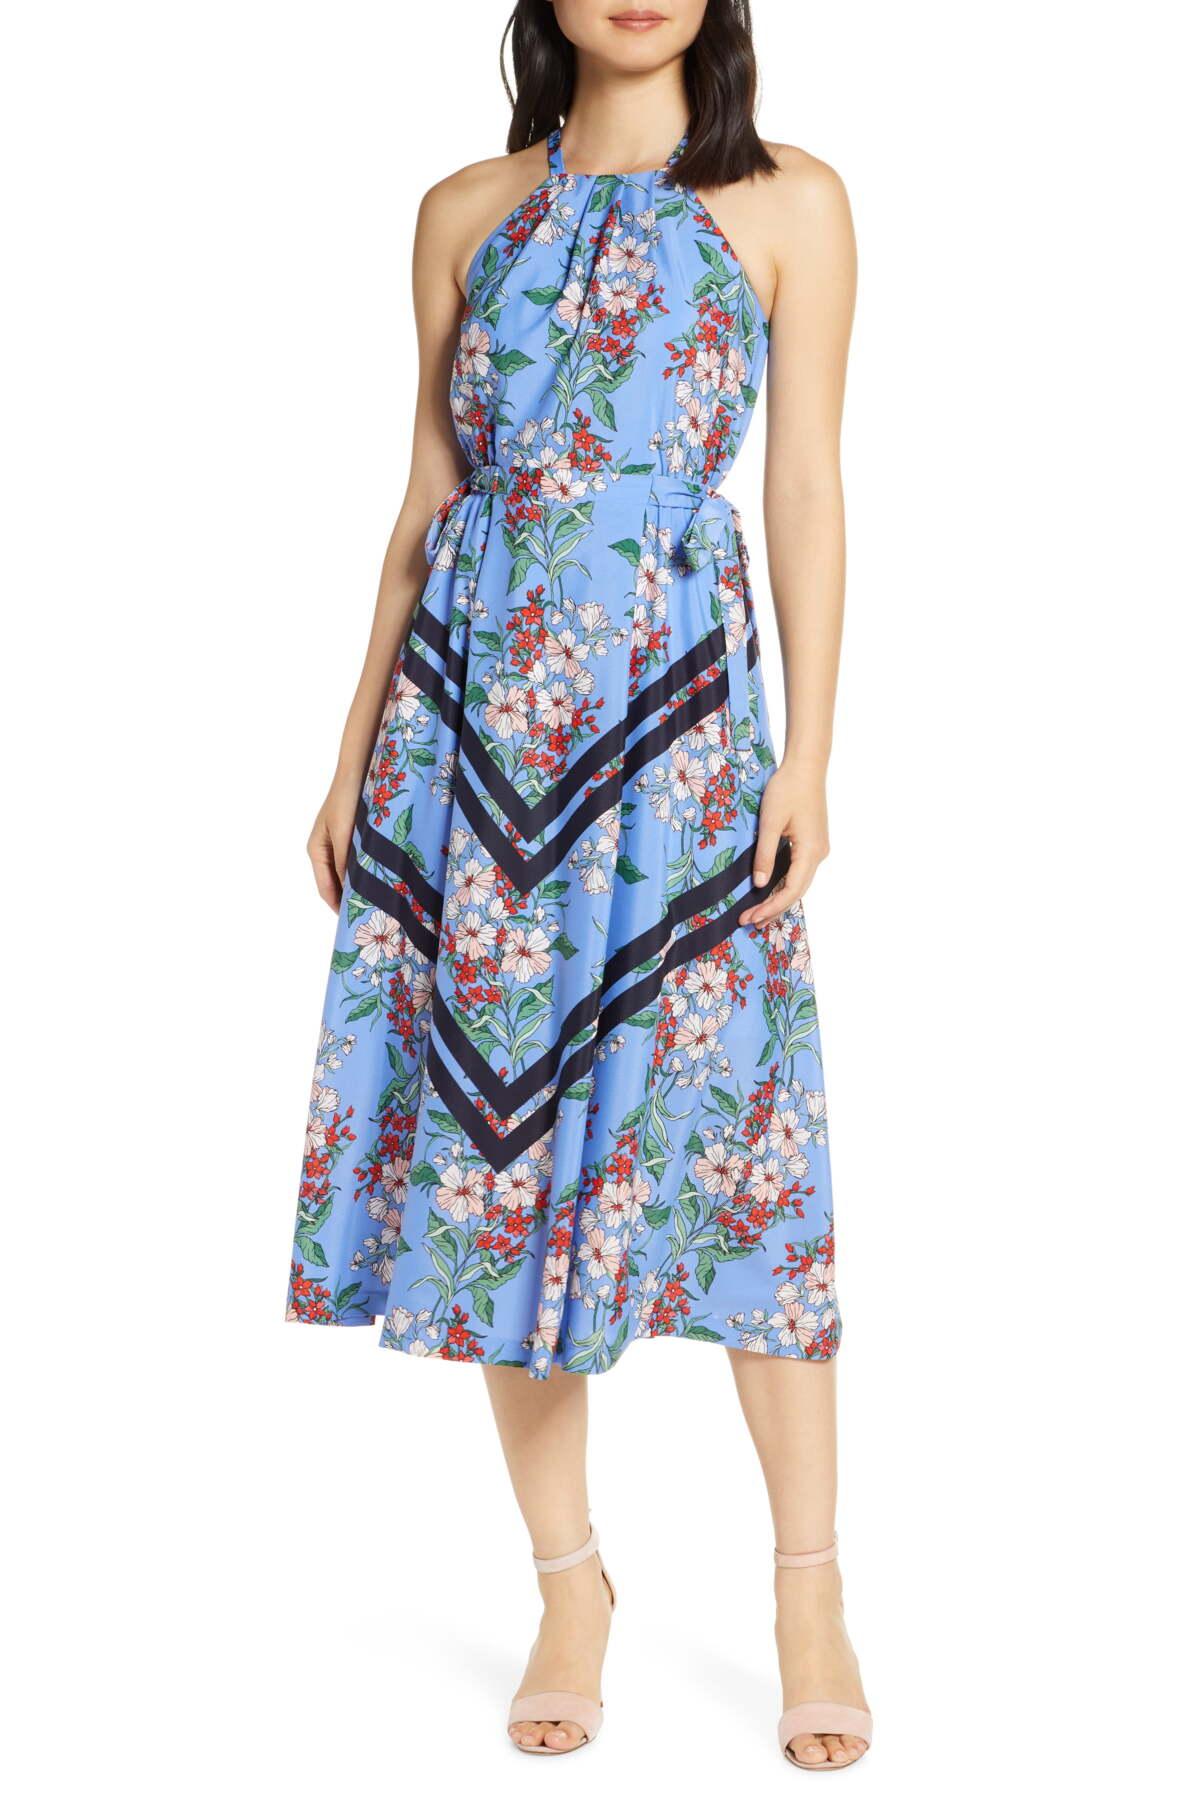 Vince Camuto Halter Neck Fit & Flare Midi Dress in Blue - Lyst